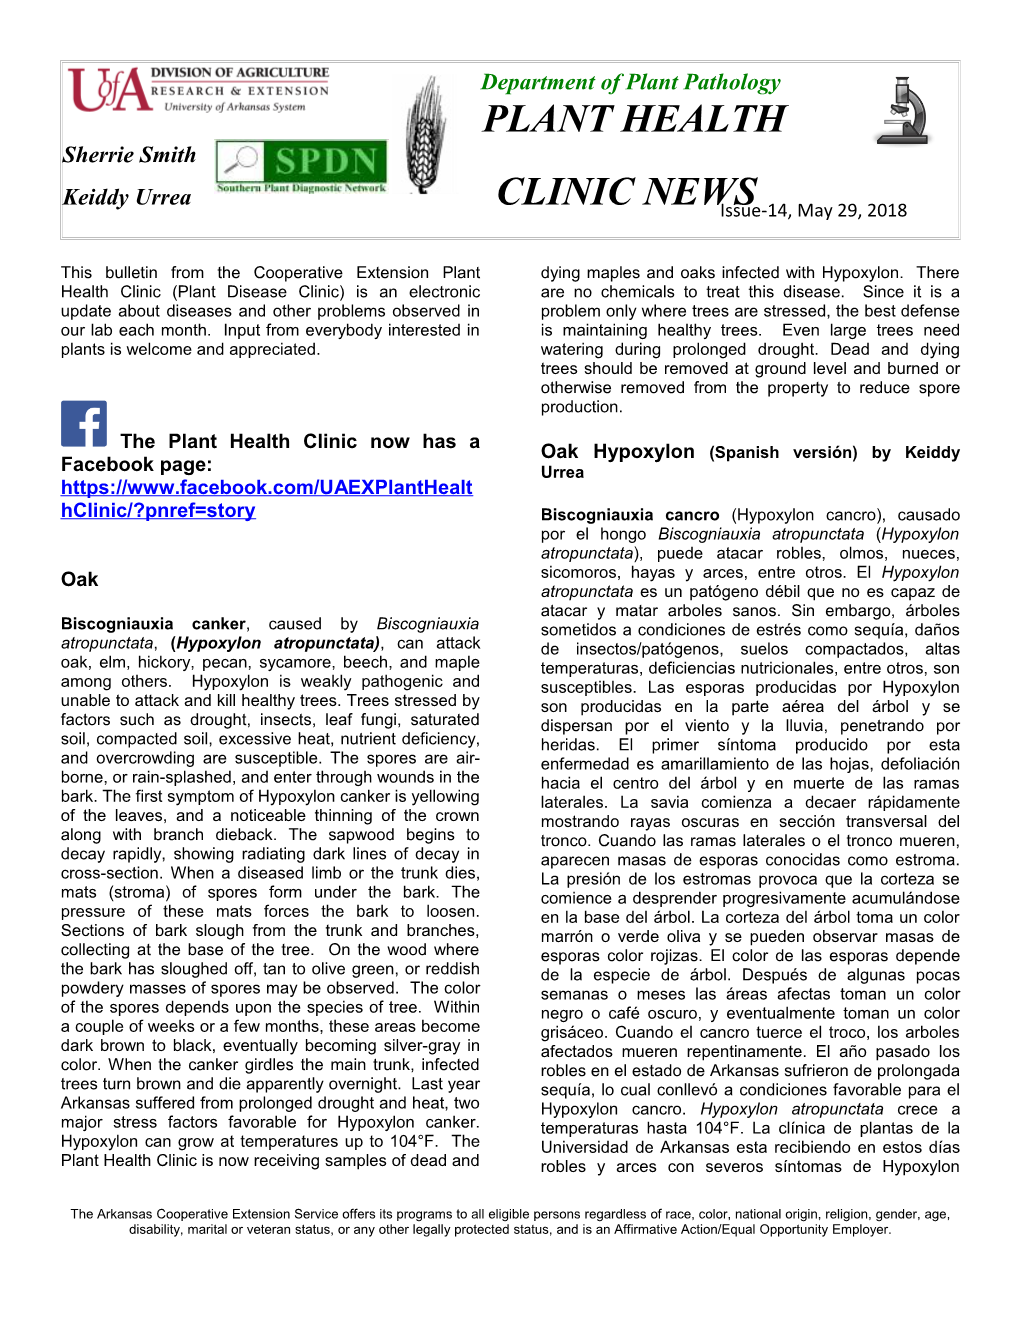 Plant Health Clinic Newsletter-Issue 14, 2018